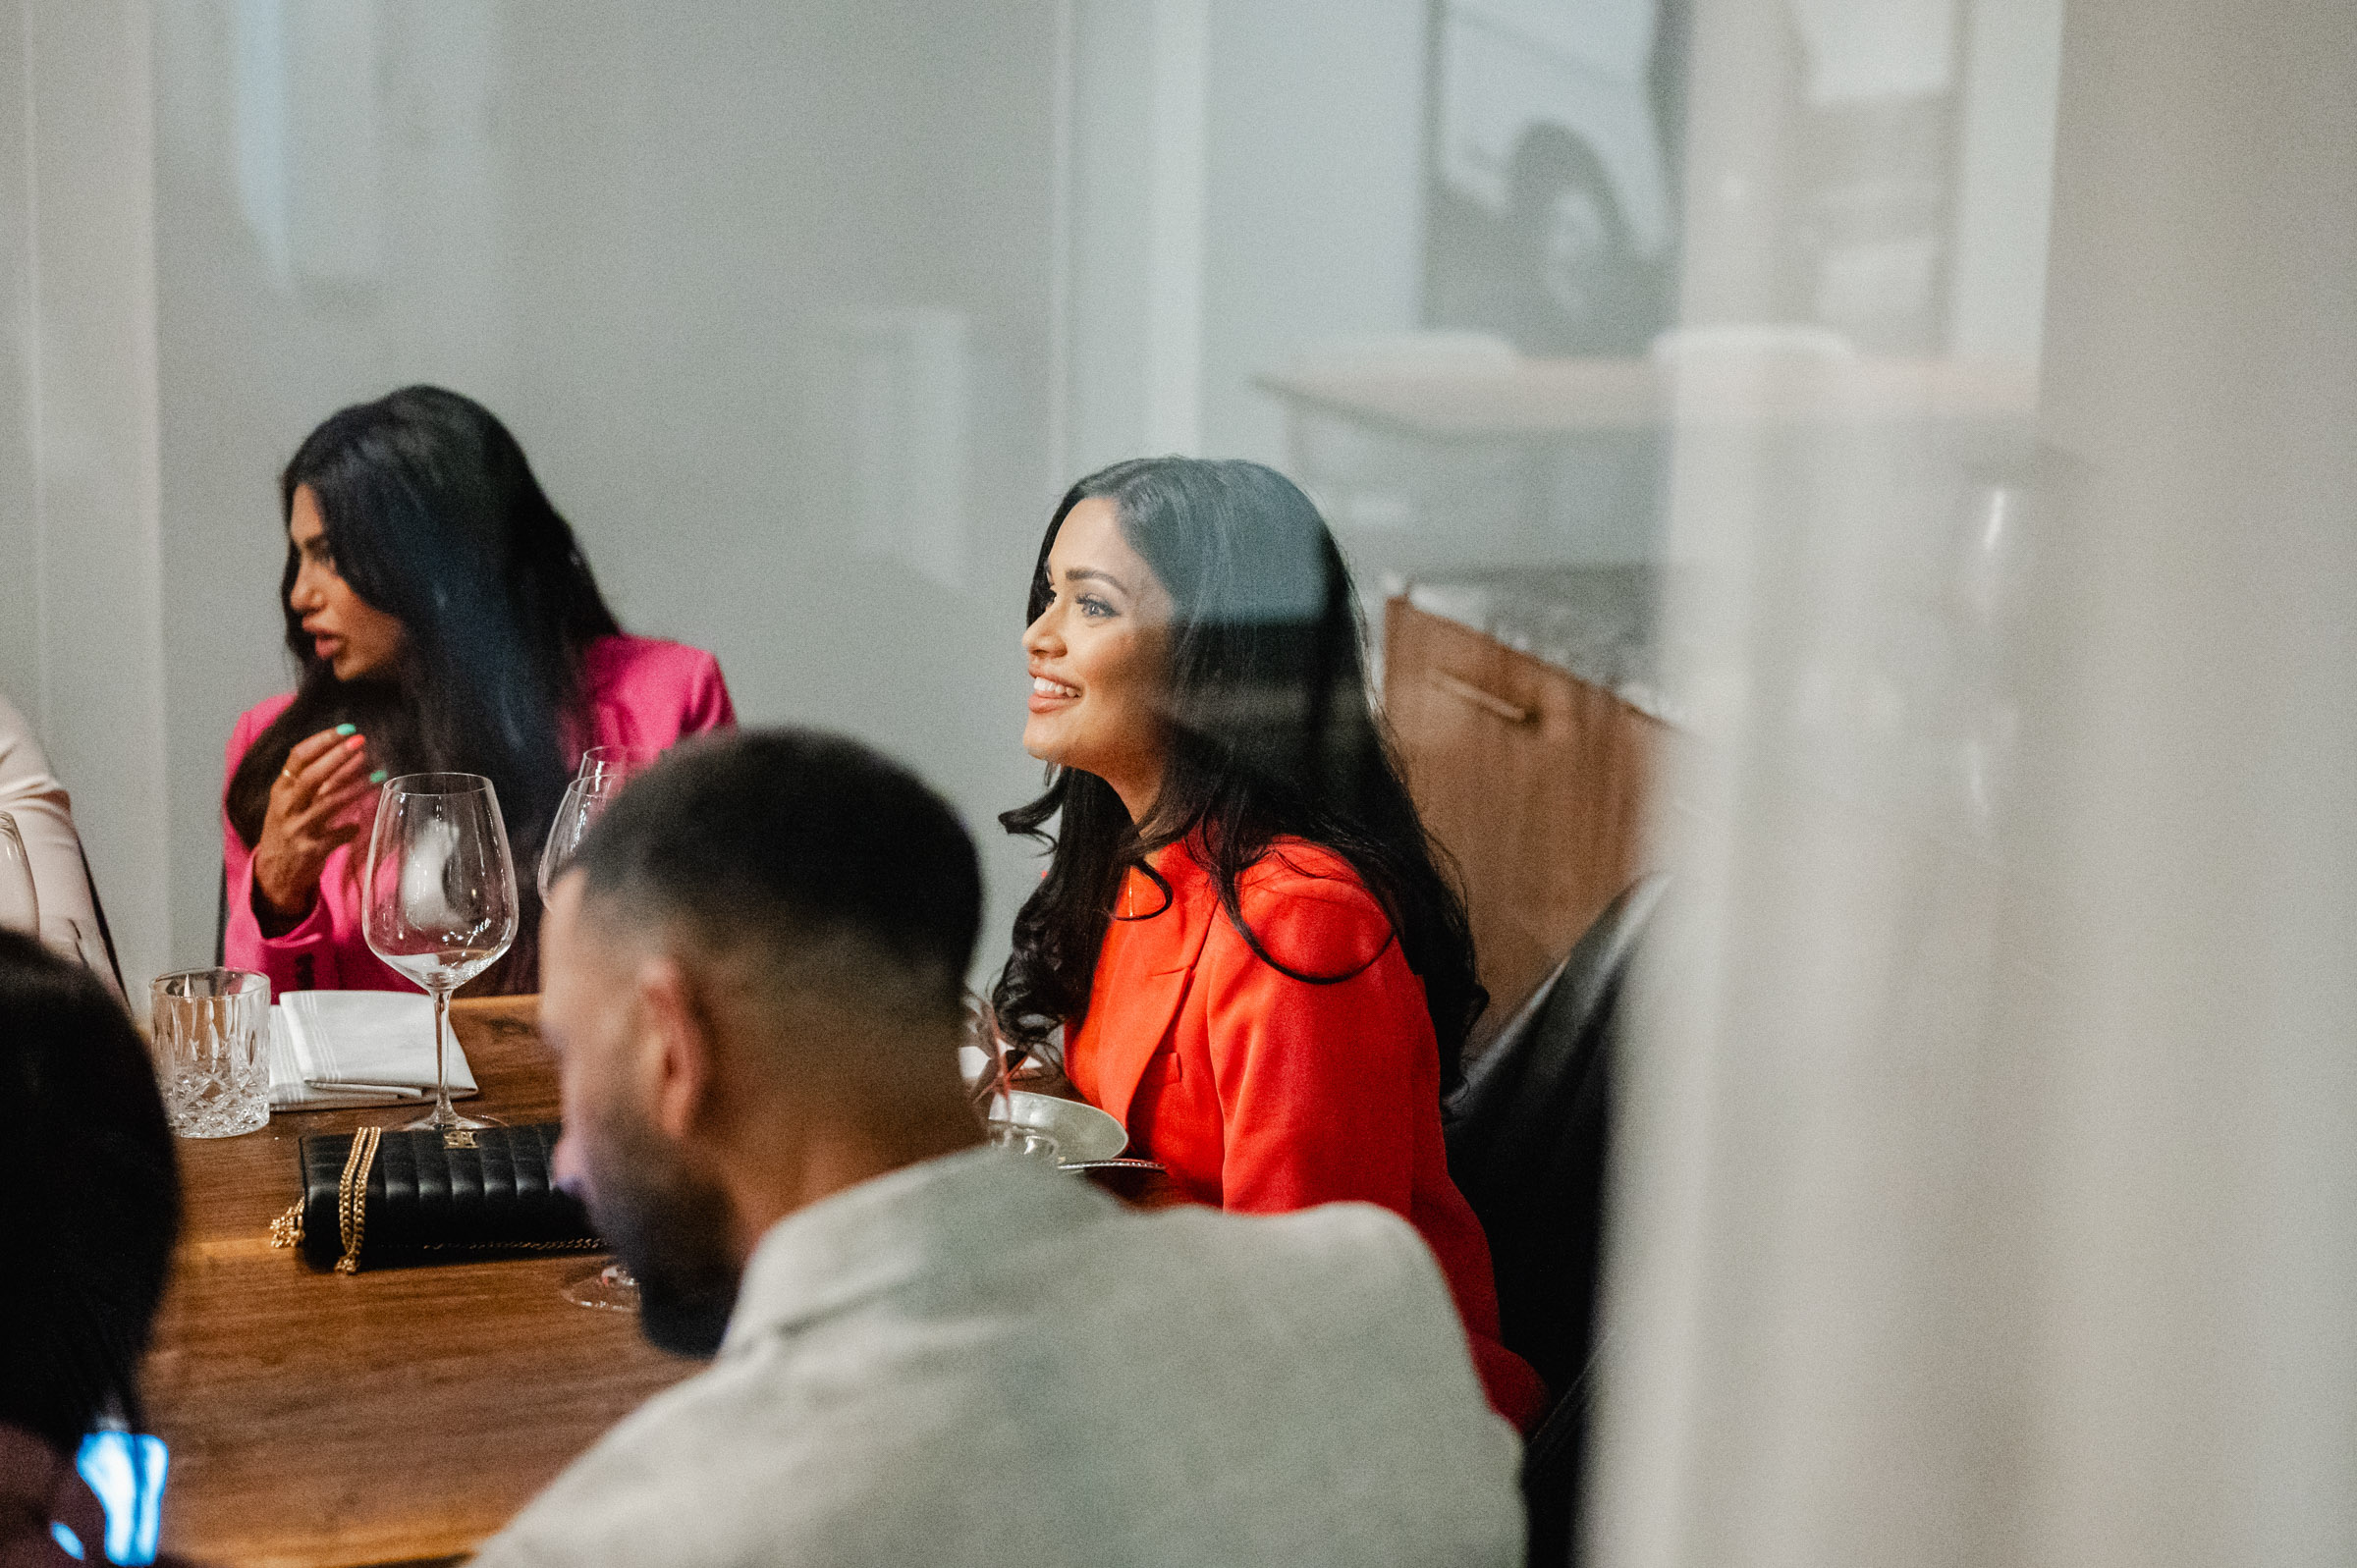 Three people sit around a table, with one woman in a bright red outfit smiling. Wine glasses and plates are visible on the table. The image, captured through a glass window, exemplifies event photography at its finest.